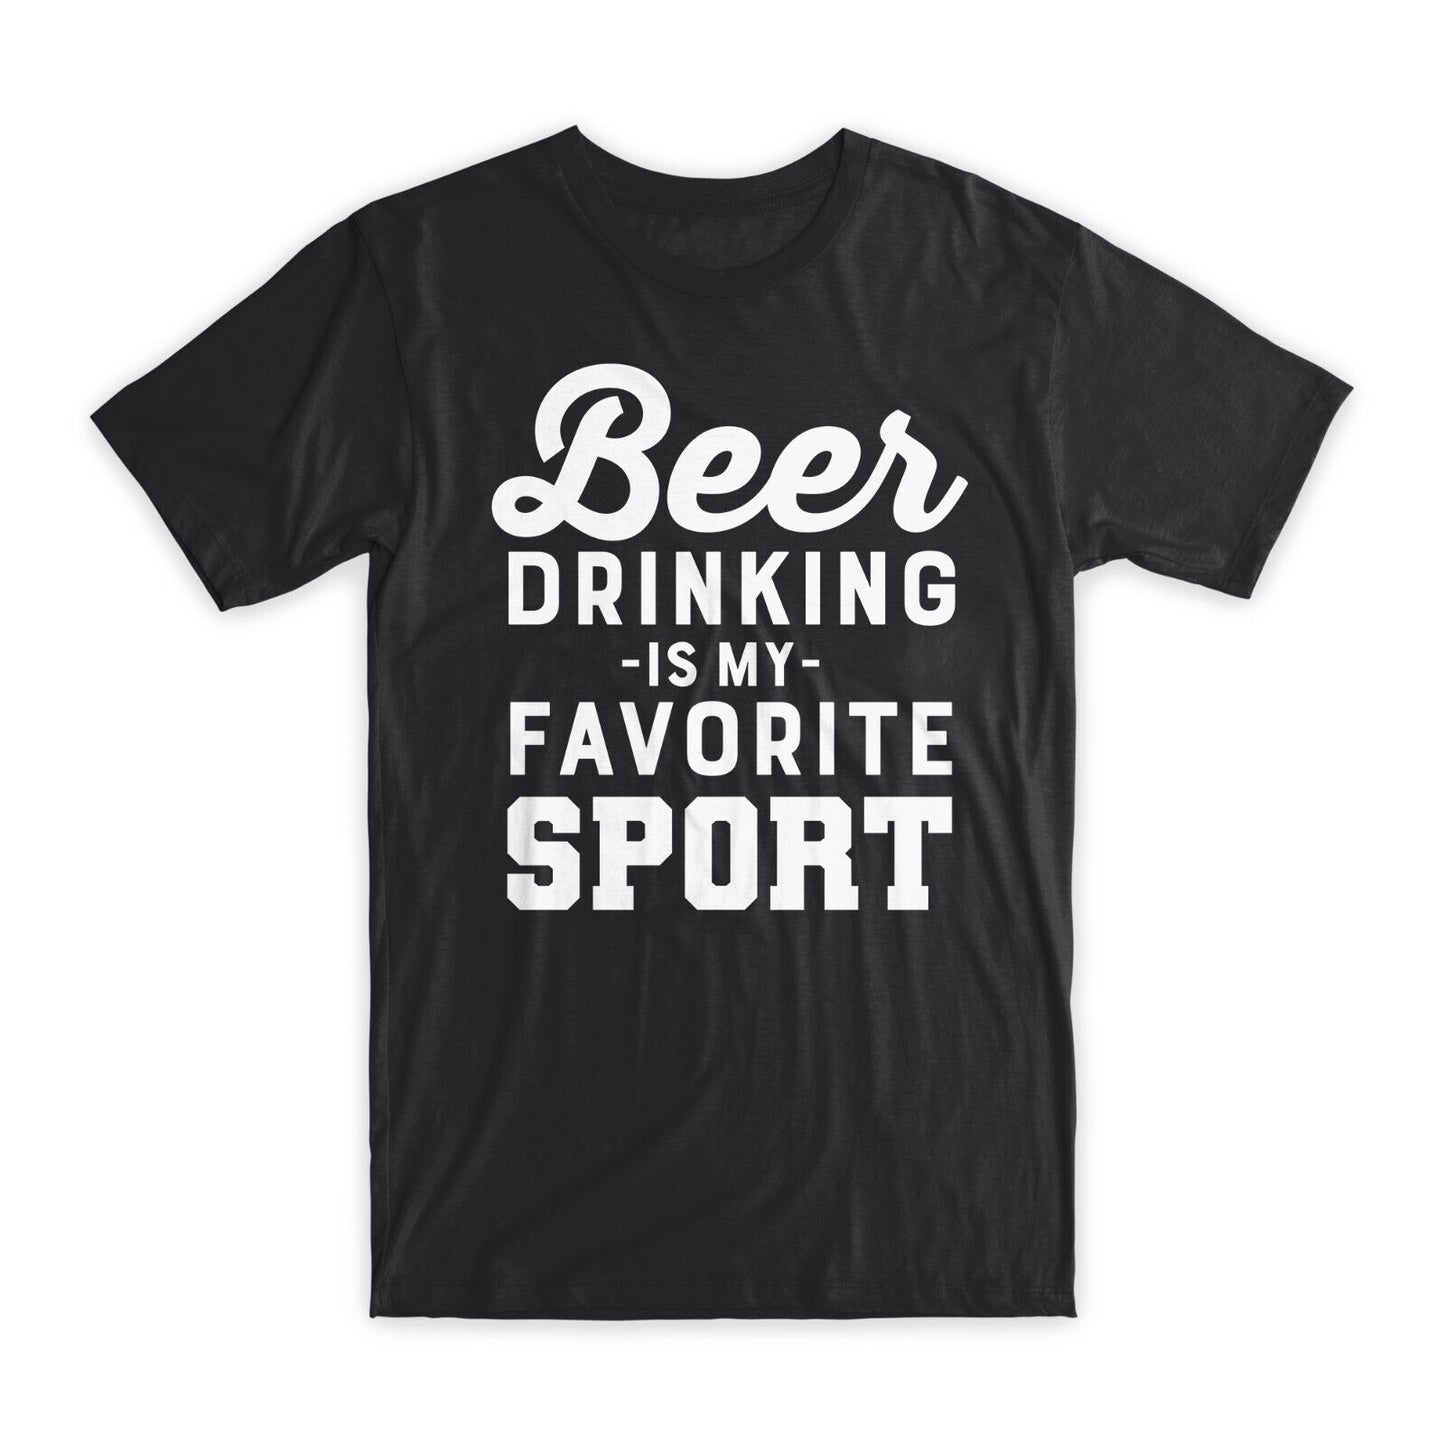 Beer Drinking is My Favorite Sport T-Shirt Premium Soft Cotton Funny T Gift NEW